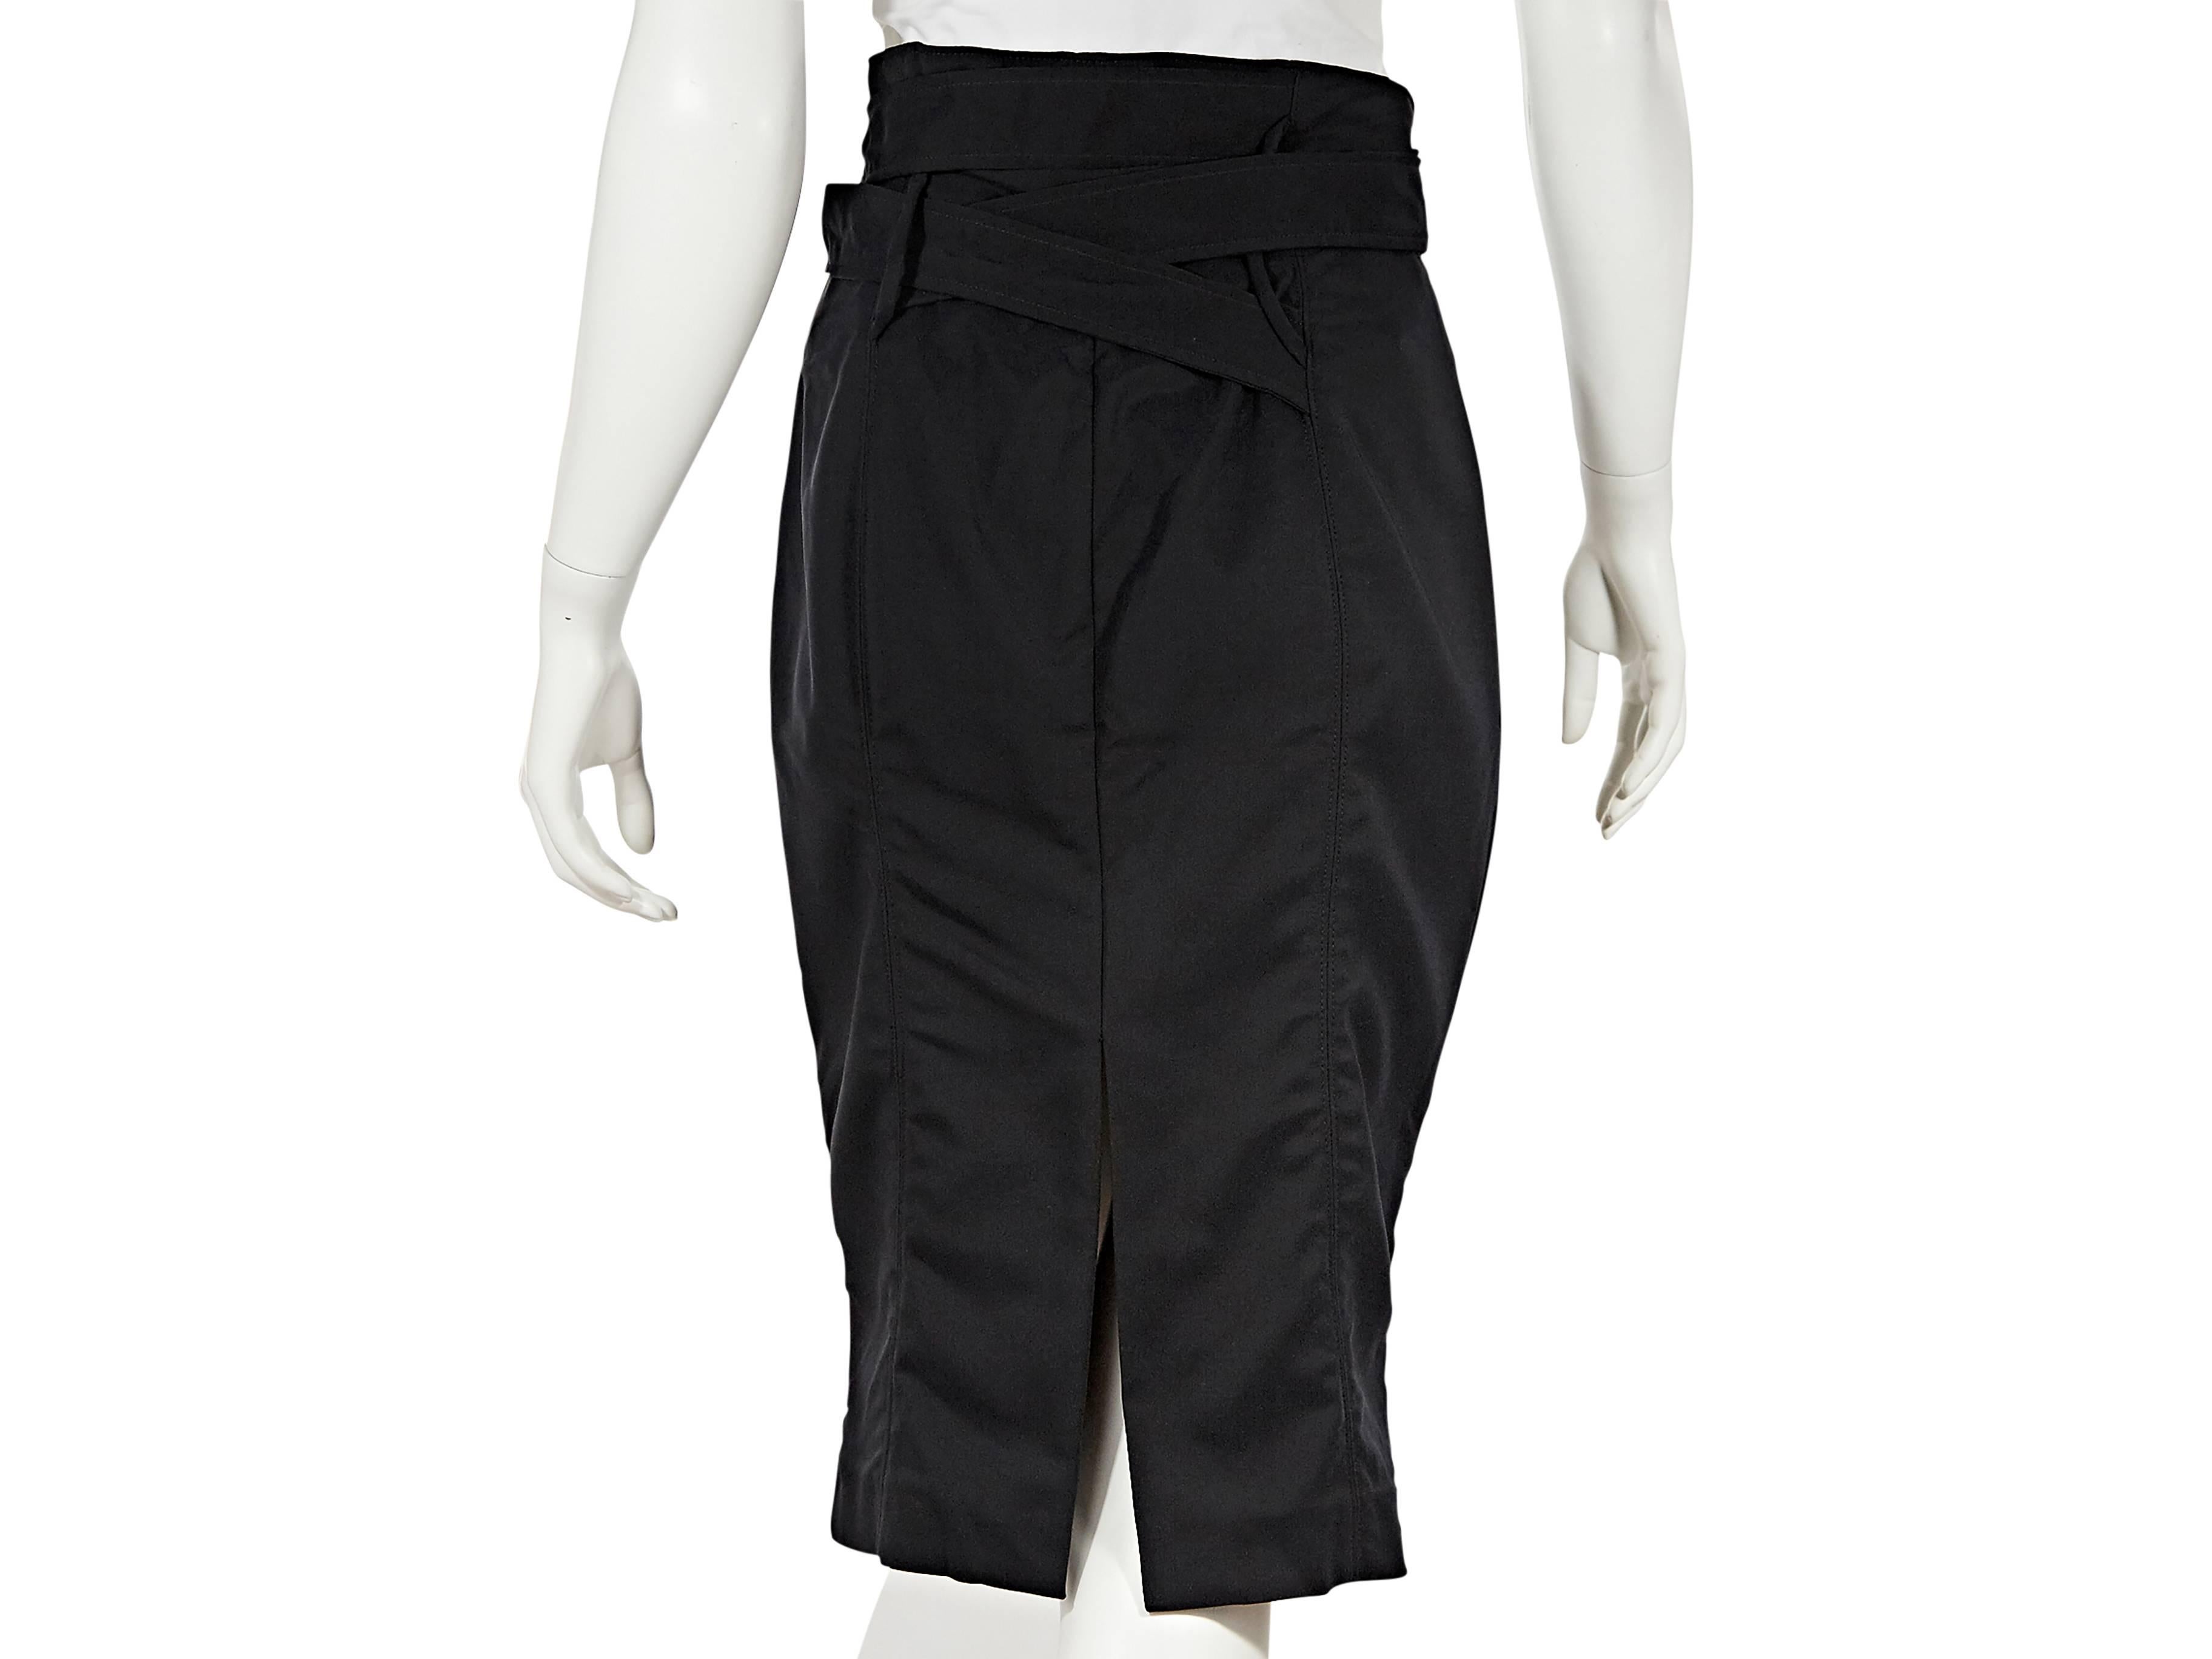 Black cotton pencil skirt by Gucci.  Wrapped belted waist.  Seams create a flattering silhouette.  Center back hem slit.  Goldtone hardware.